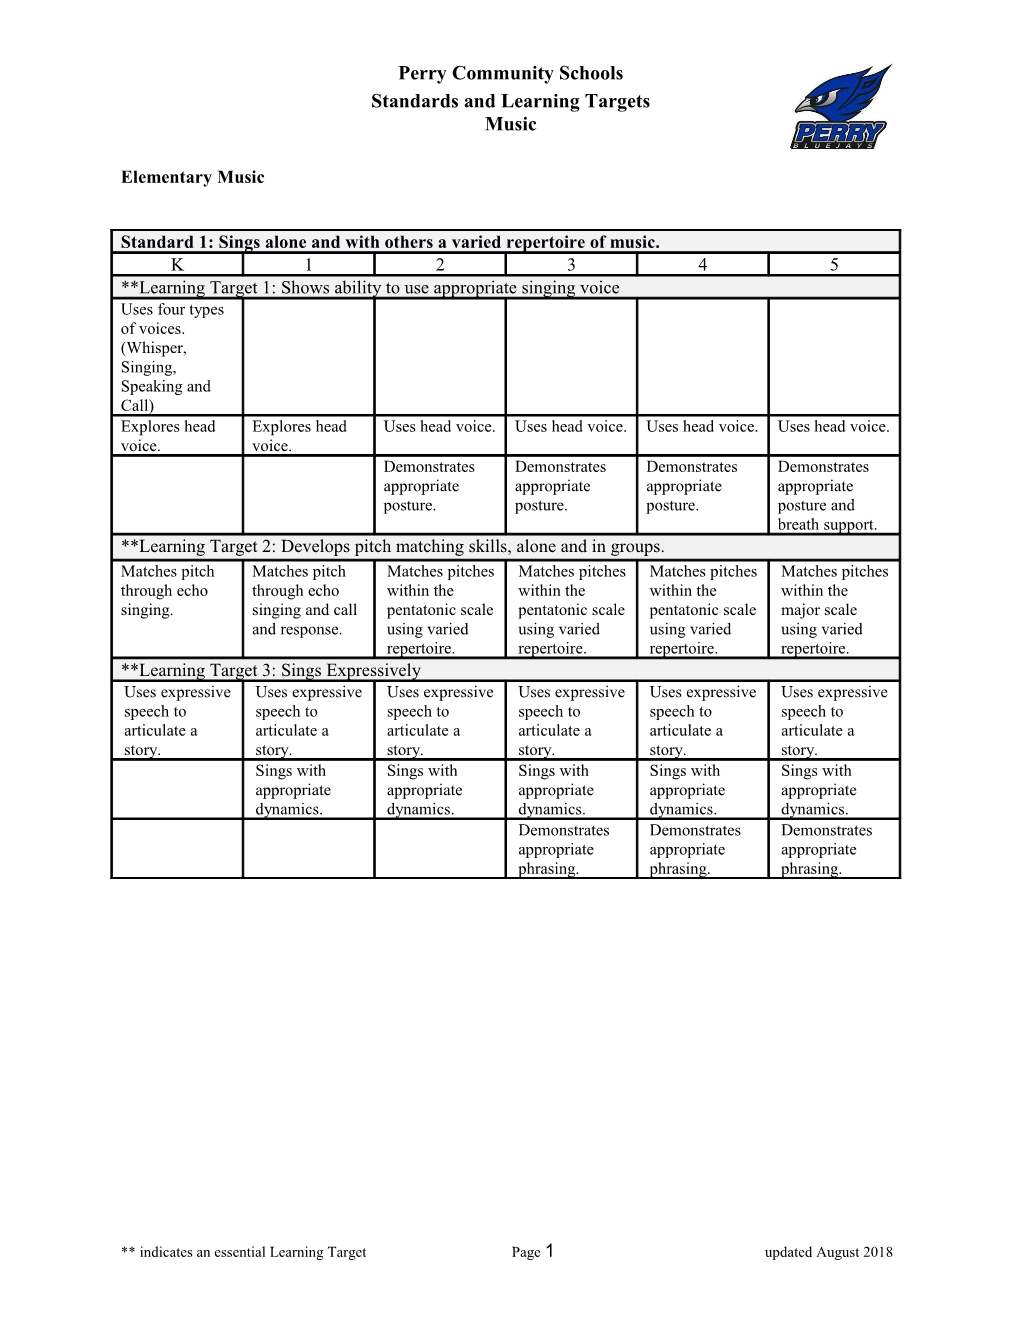 Standards and Learning Targets